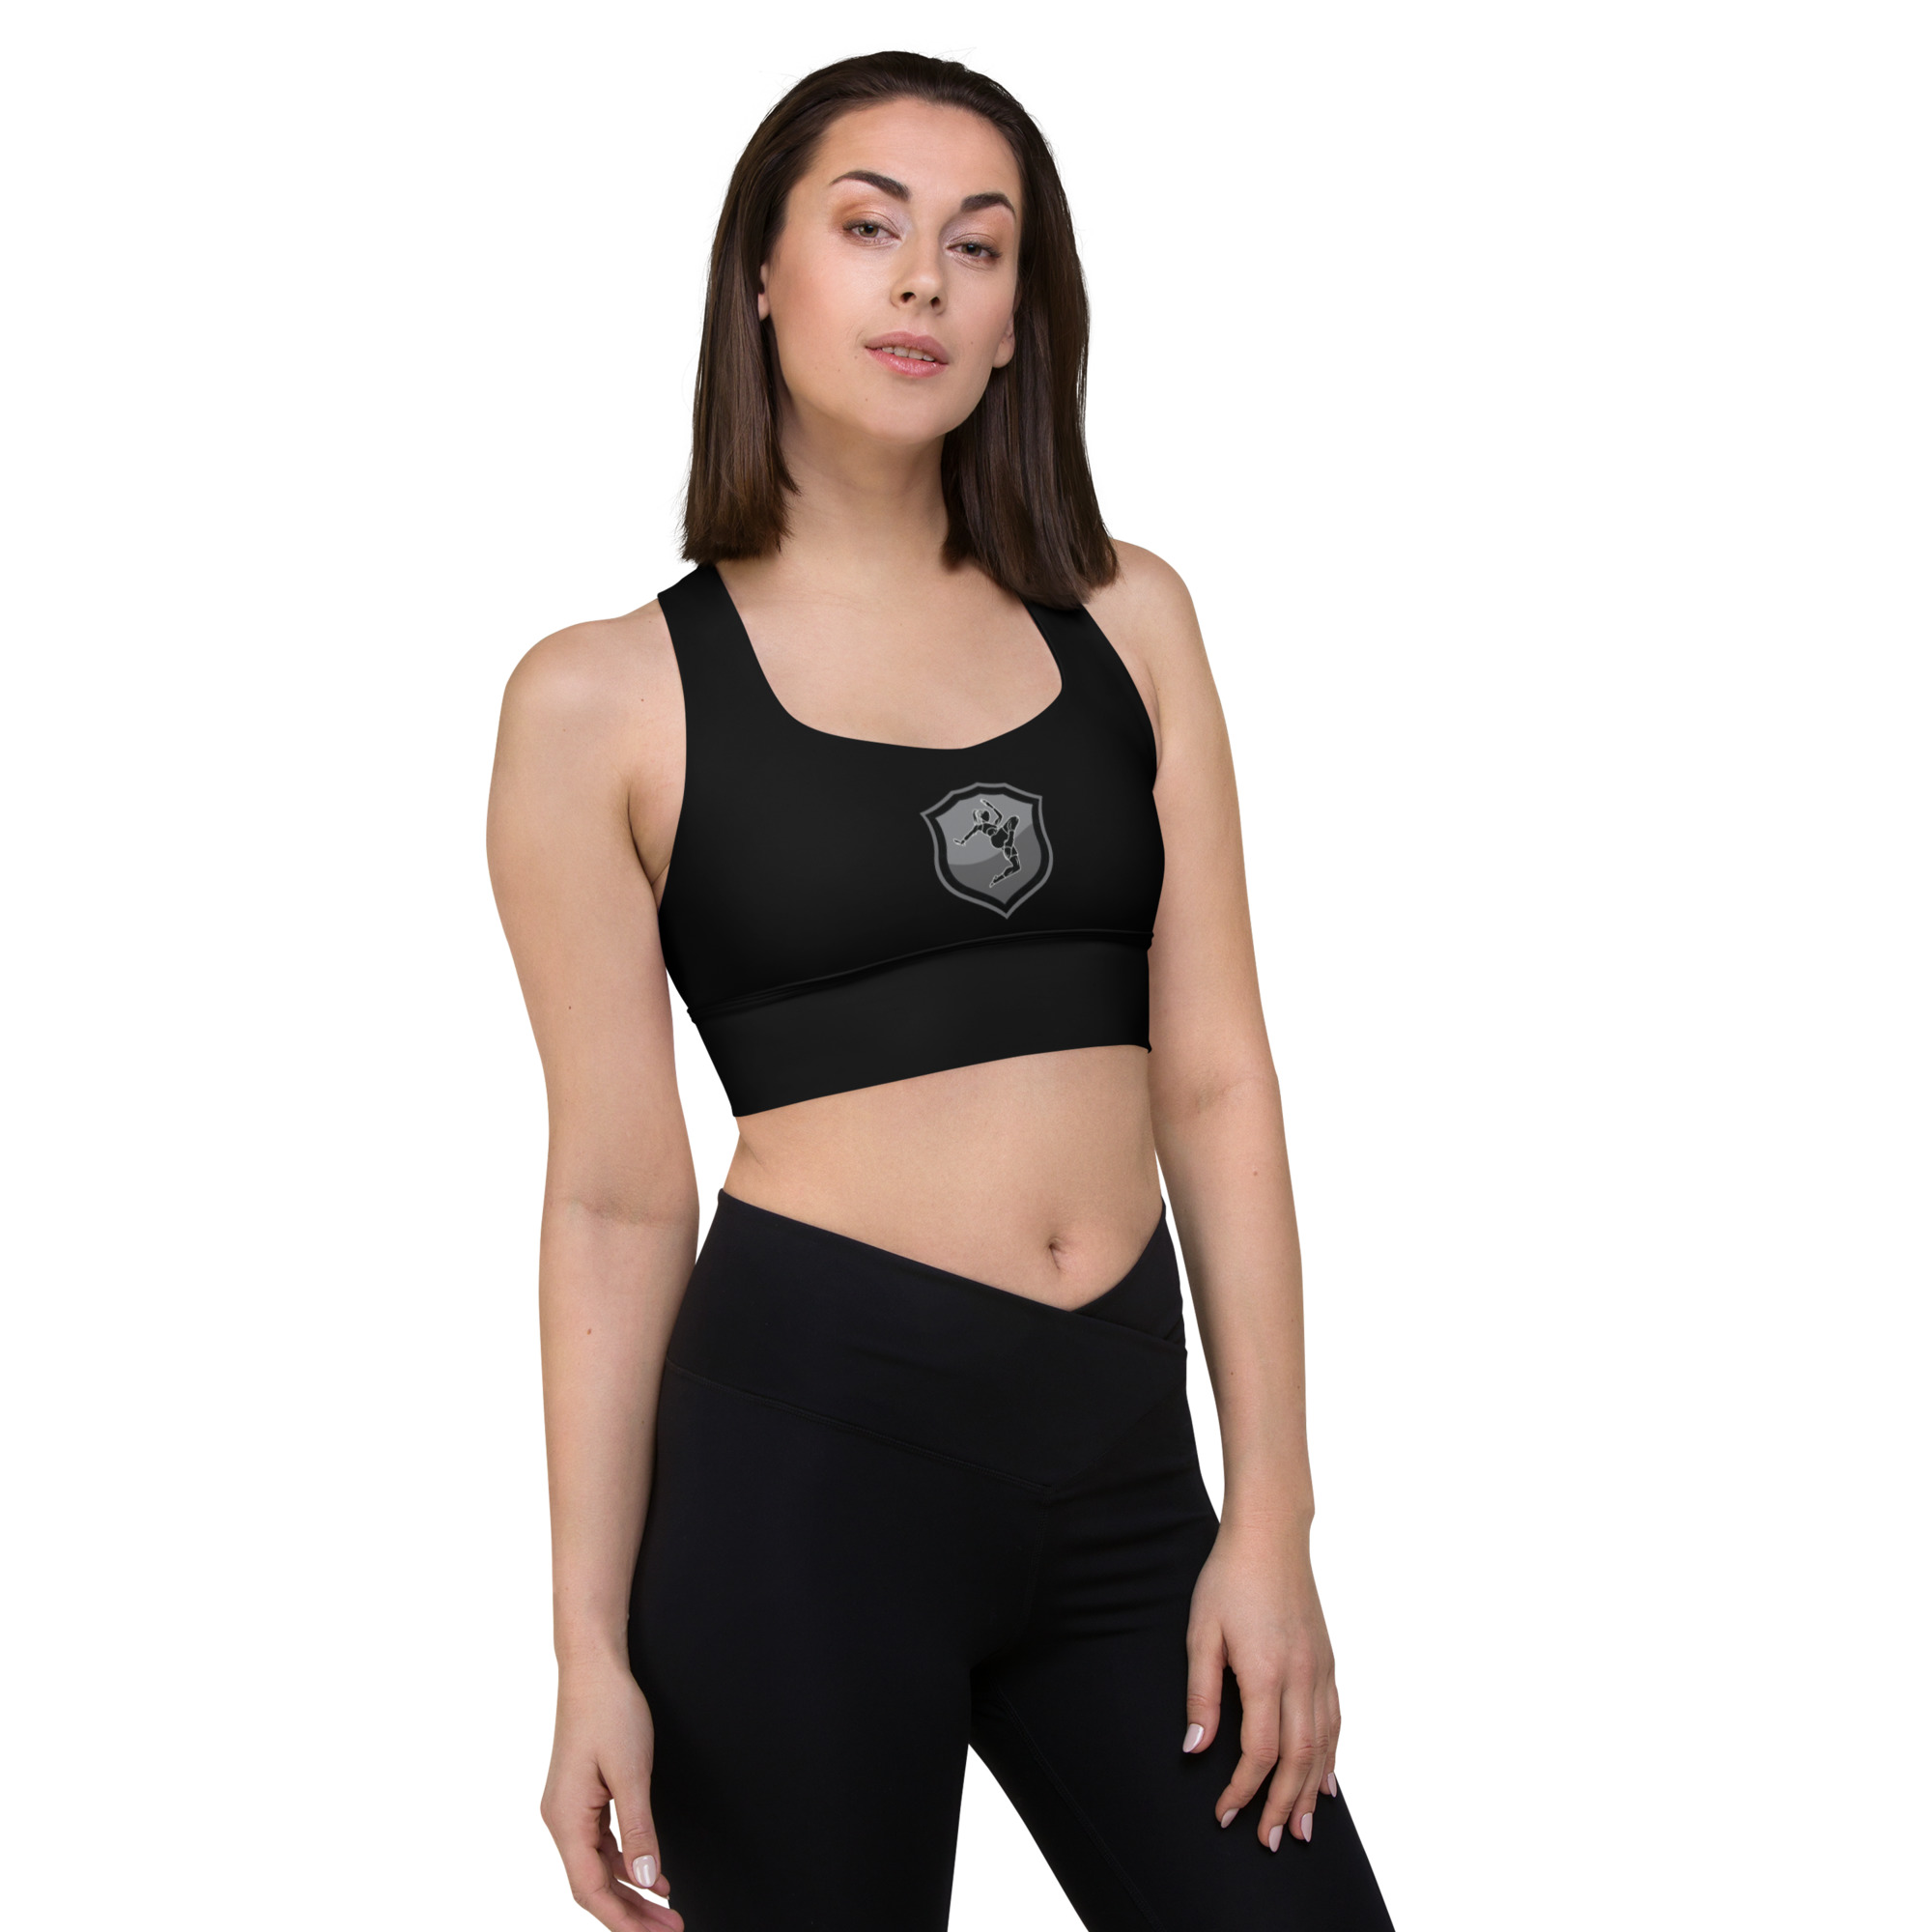 https://blackeaglemartialarts.ca/wp-content/uploads/2022/11/all-over-print-longline-sports-bra-white-right-front-63686742d3736.jpg